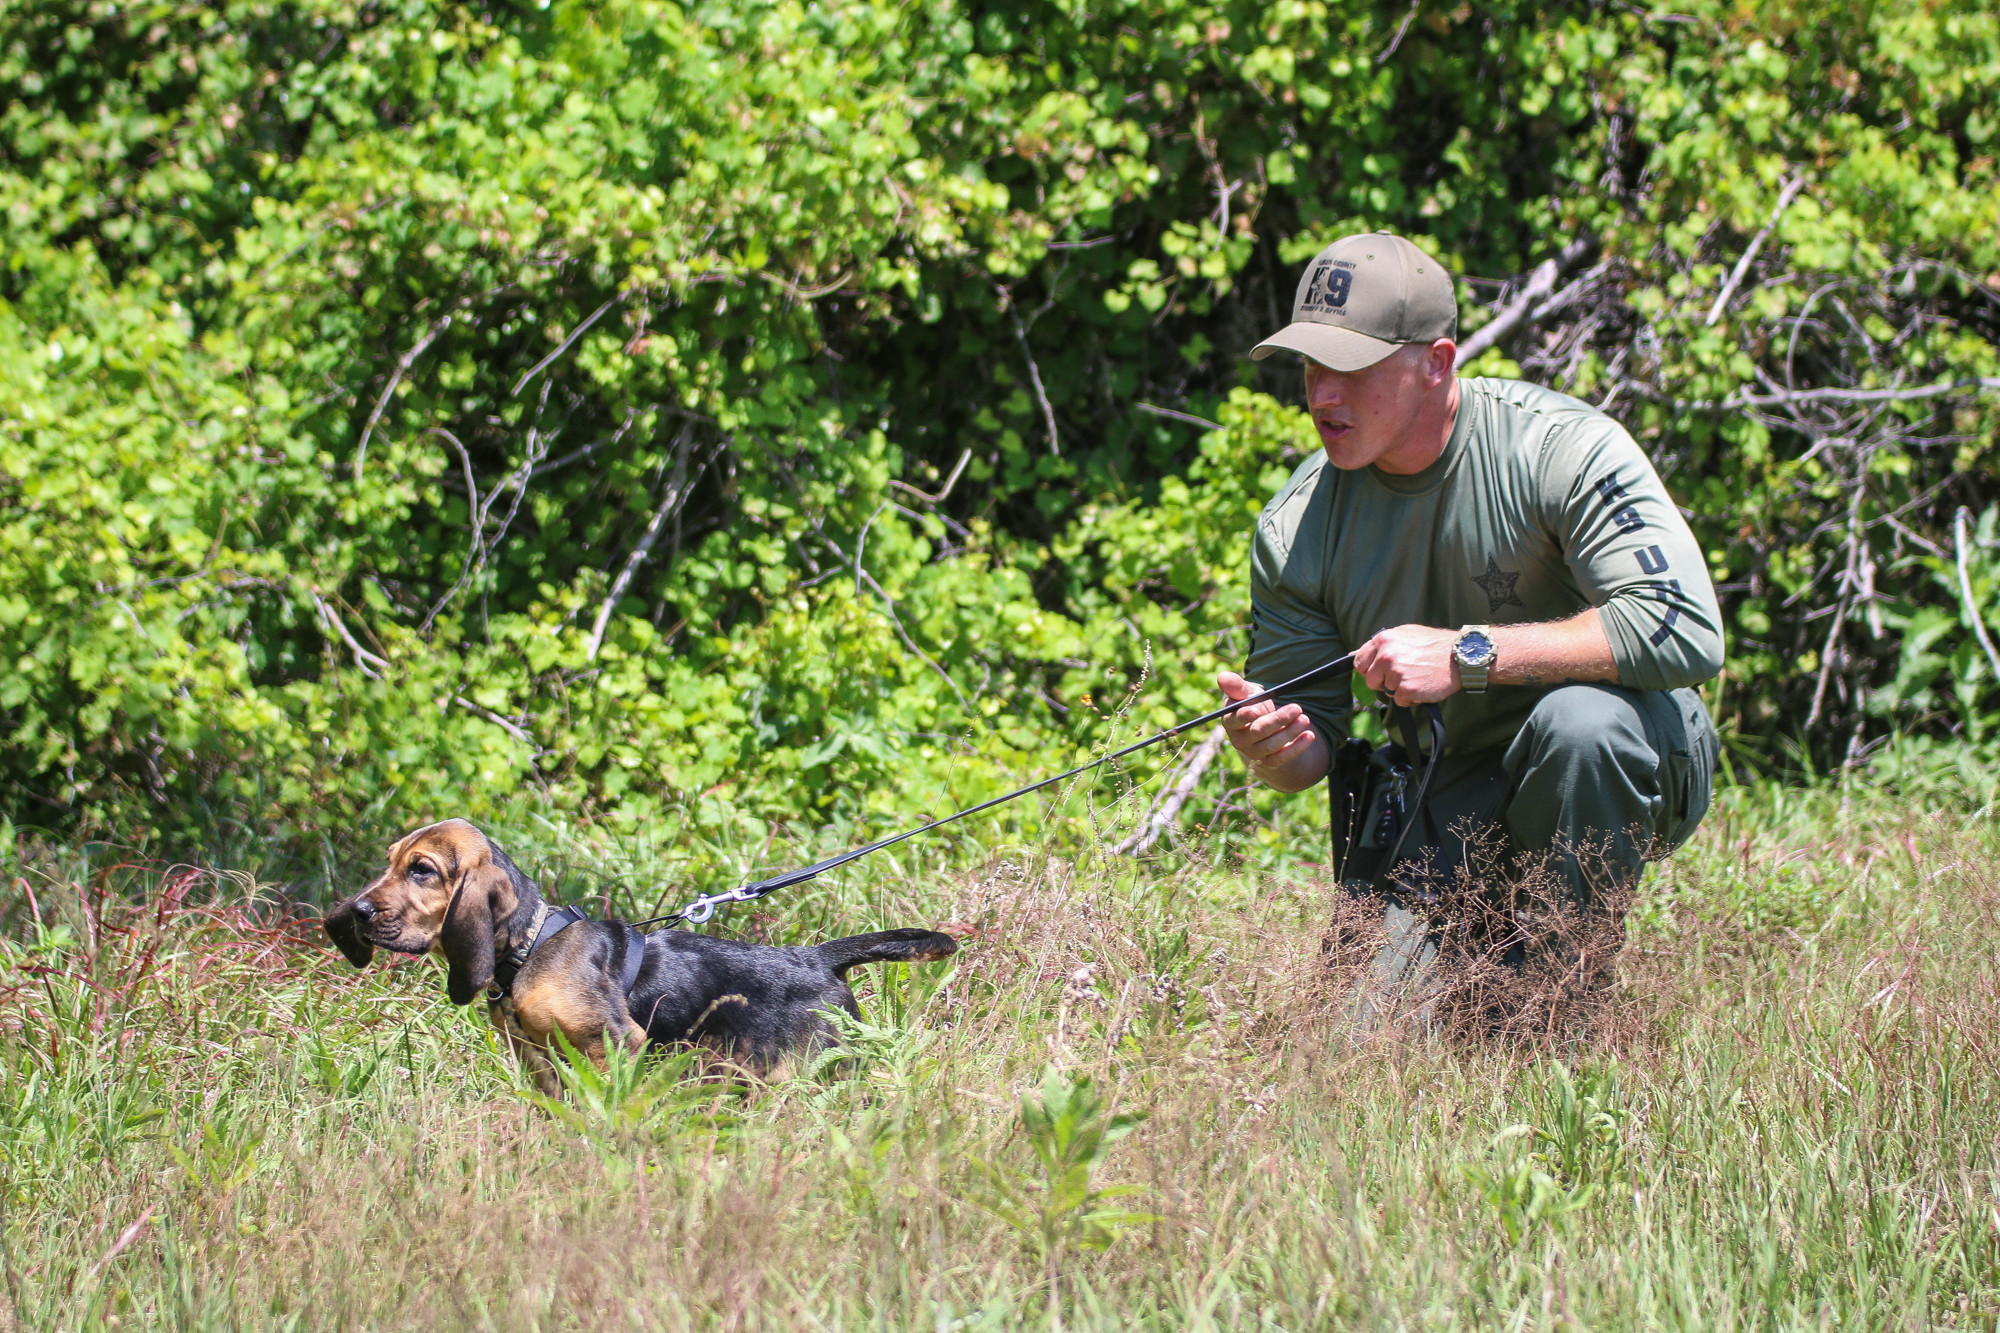 Cpl. Fred Gimbel says the command word  “such” (pronounced “tsuuk”) to K-9 Holmes during a 